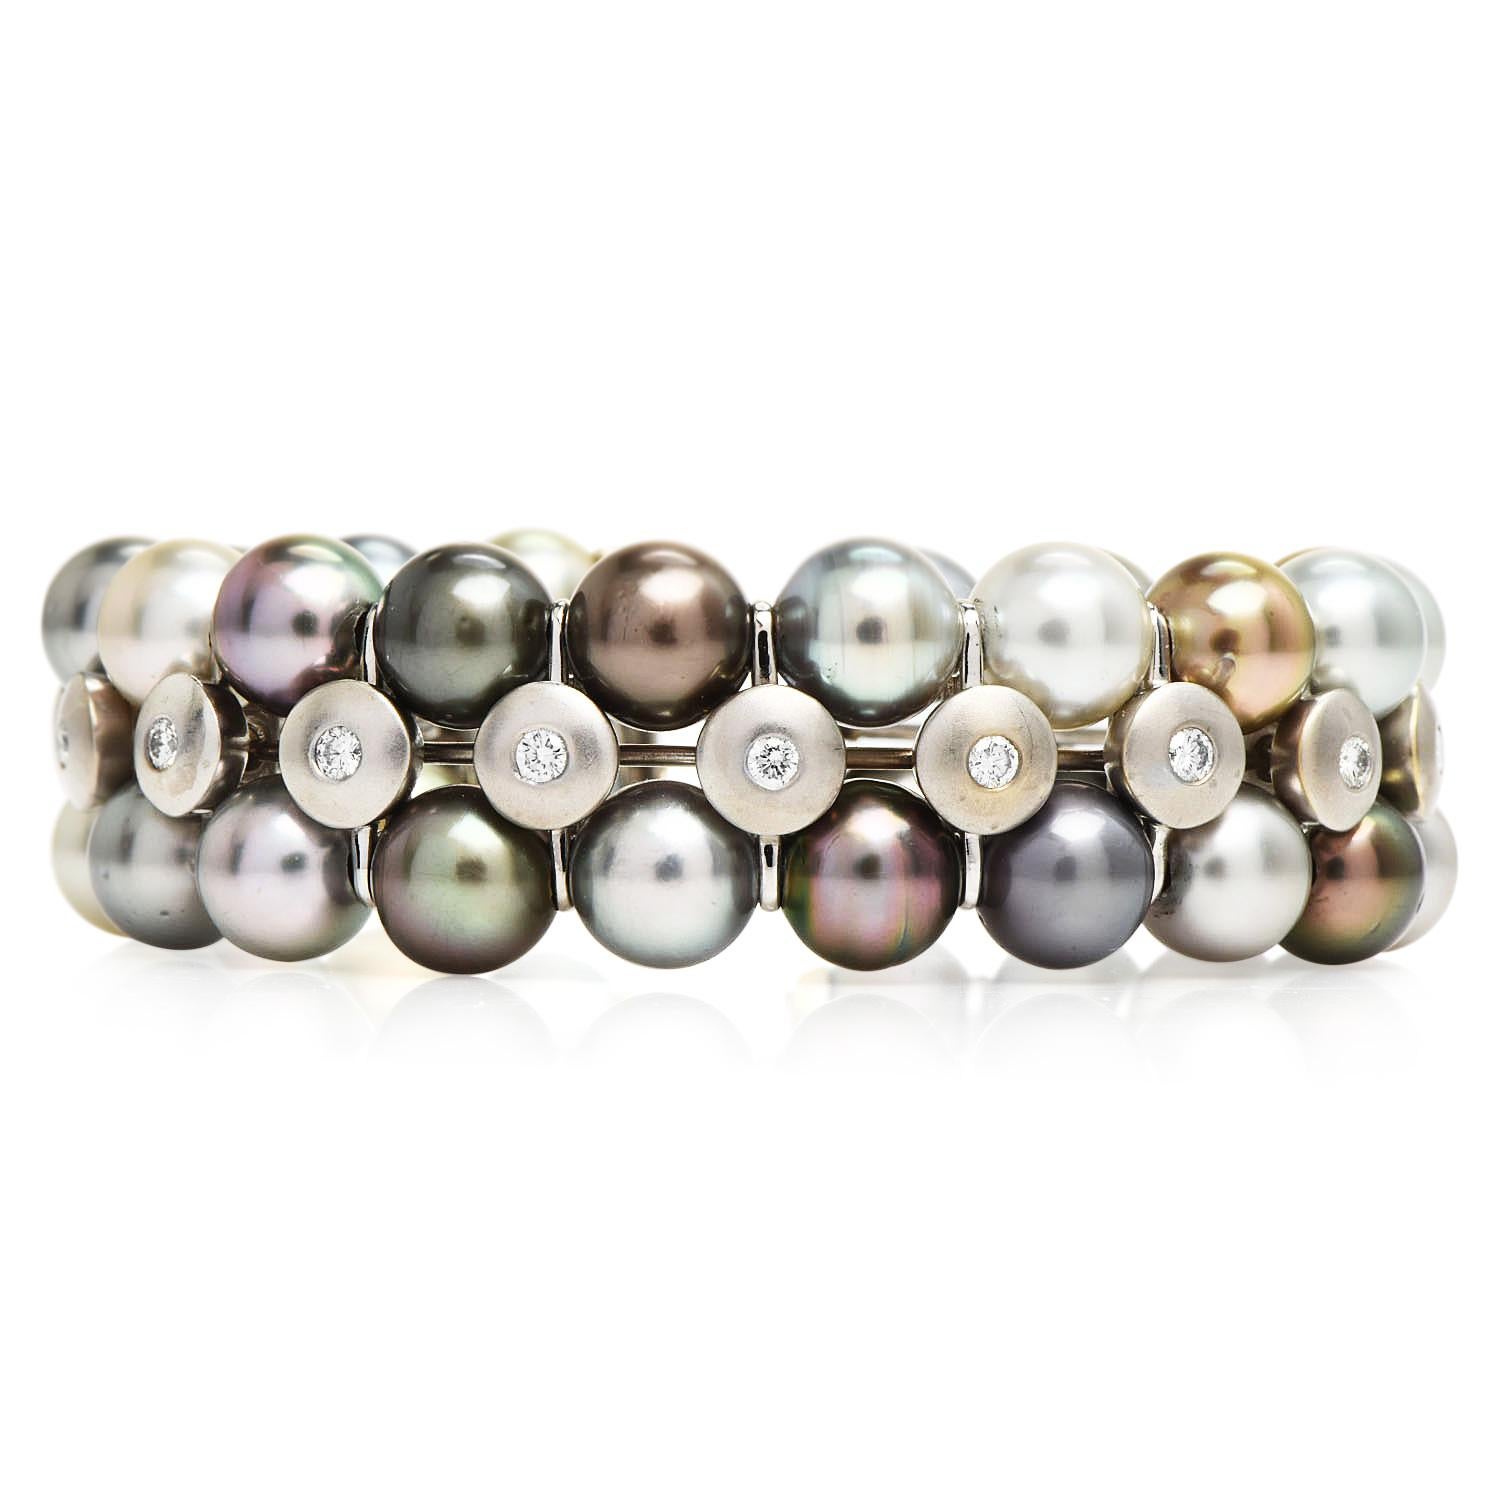 This stuunng cuff has 36  lustrous gray, silver, golden & white Tahitian pearls, With minor blemishes,  measuring 8.5 mm each.

With (17) round-cut, flush bezel set genuine Diamonds weighing approximately 1.40 carats (G-H color and VS clarity)

The